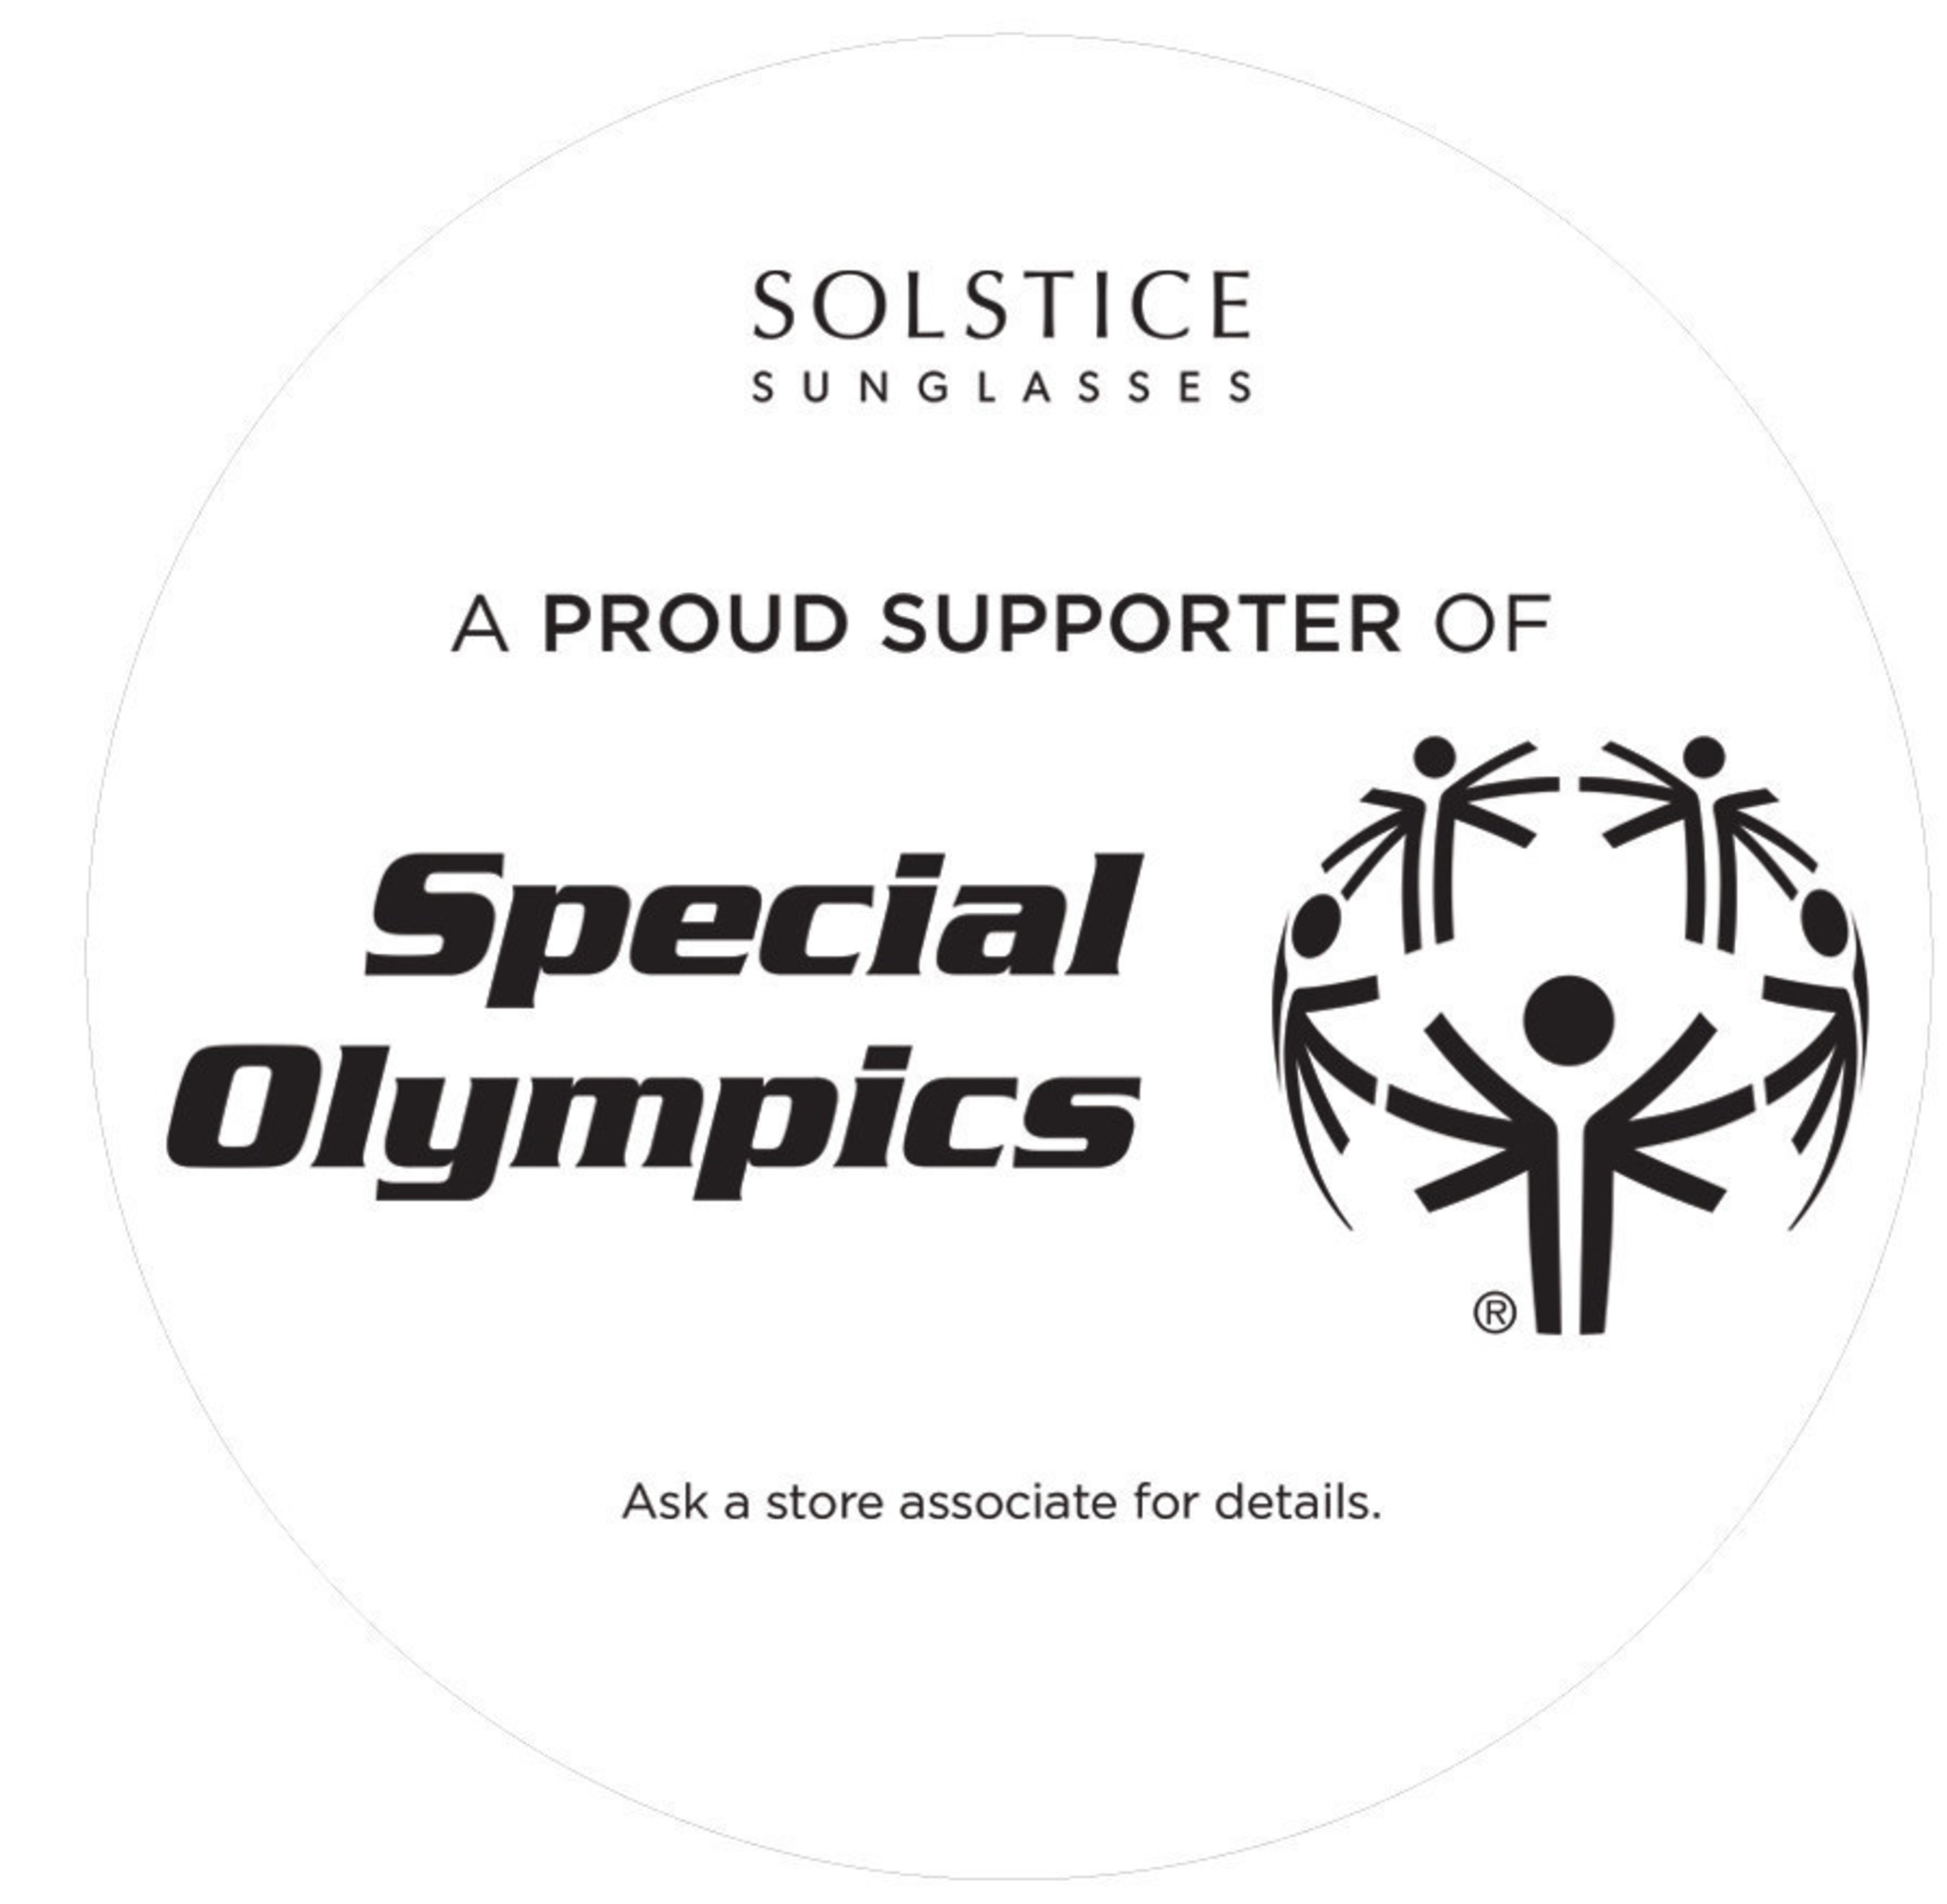 Solstice Sunglasses and Safilo Group Show Their Support of Special Olympics